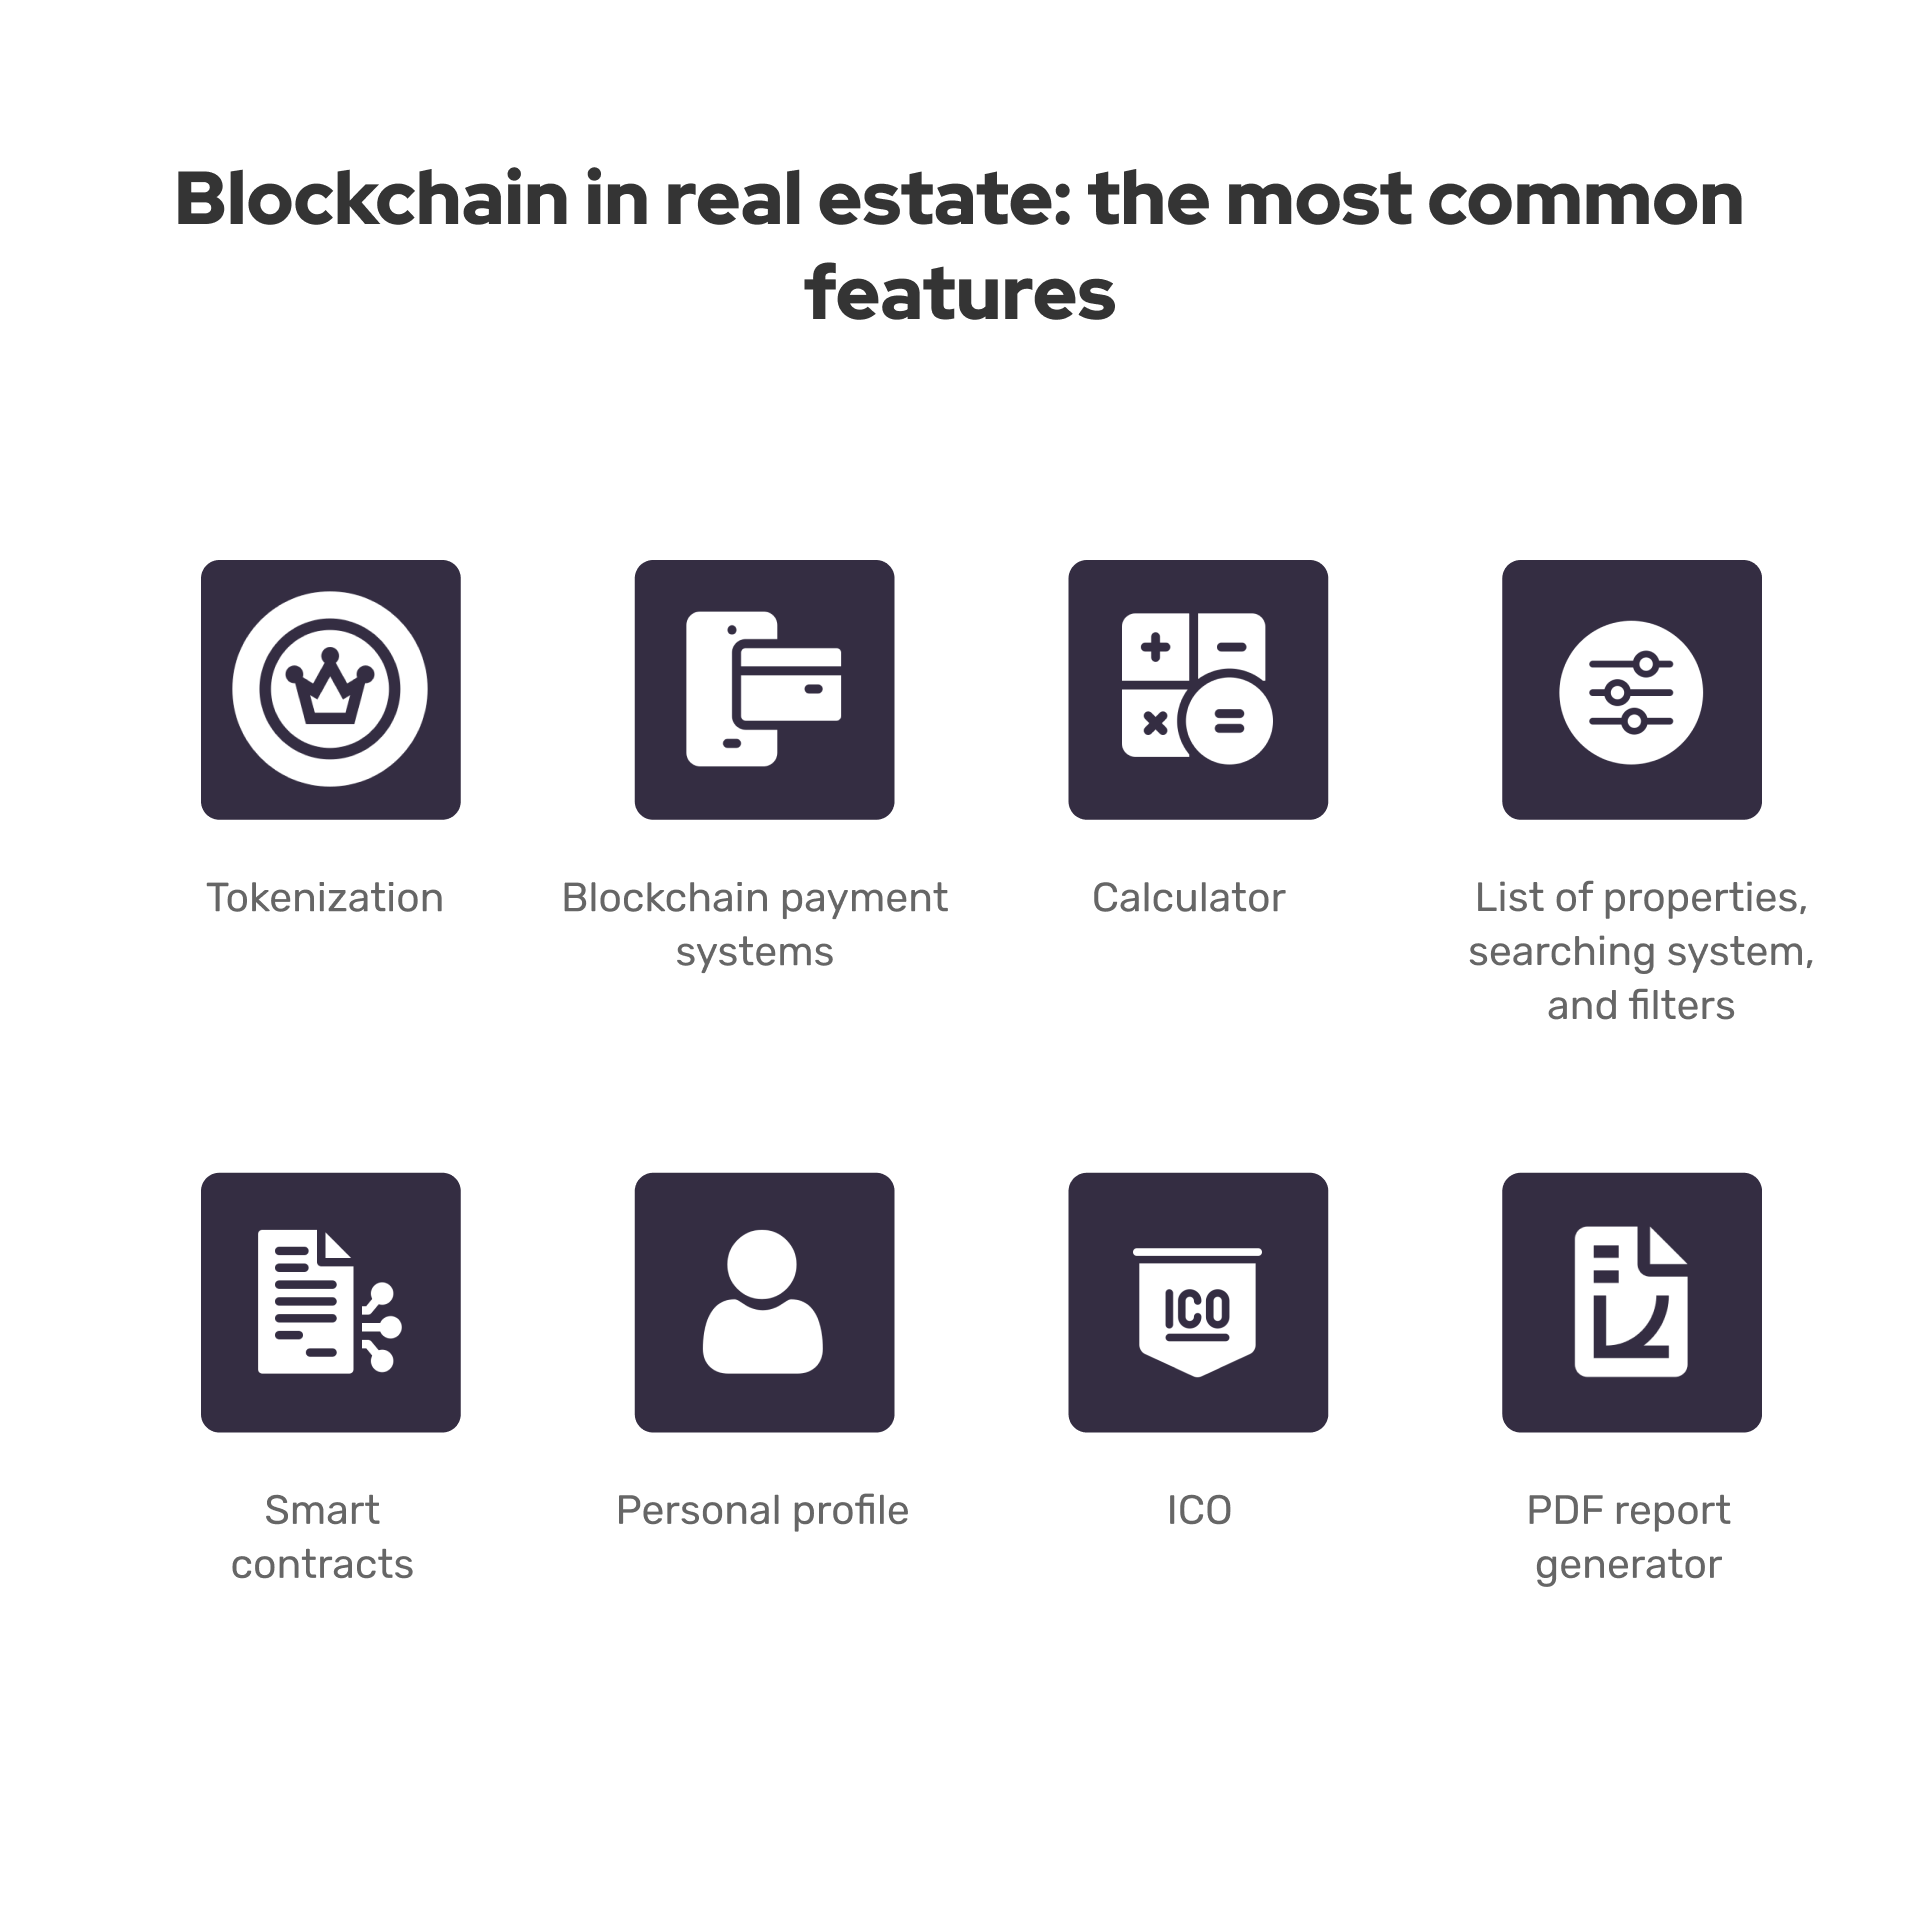 Blockchain technology offers a multitude of features for real estate applications. These features include tokenization, blockchain-based payment systems, property calculator, searchable property listings, advanced search filters, smart contract automation, personal profiles, initial coin offerings (ICOs), and PDF report generation.